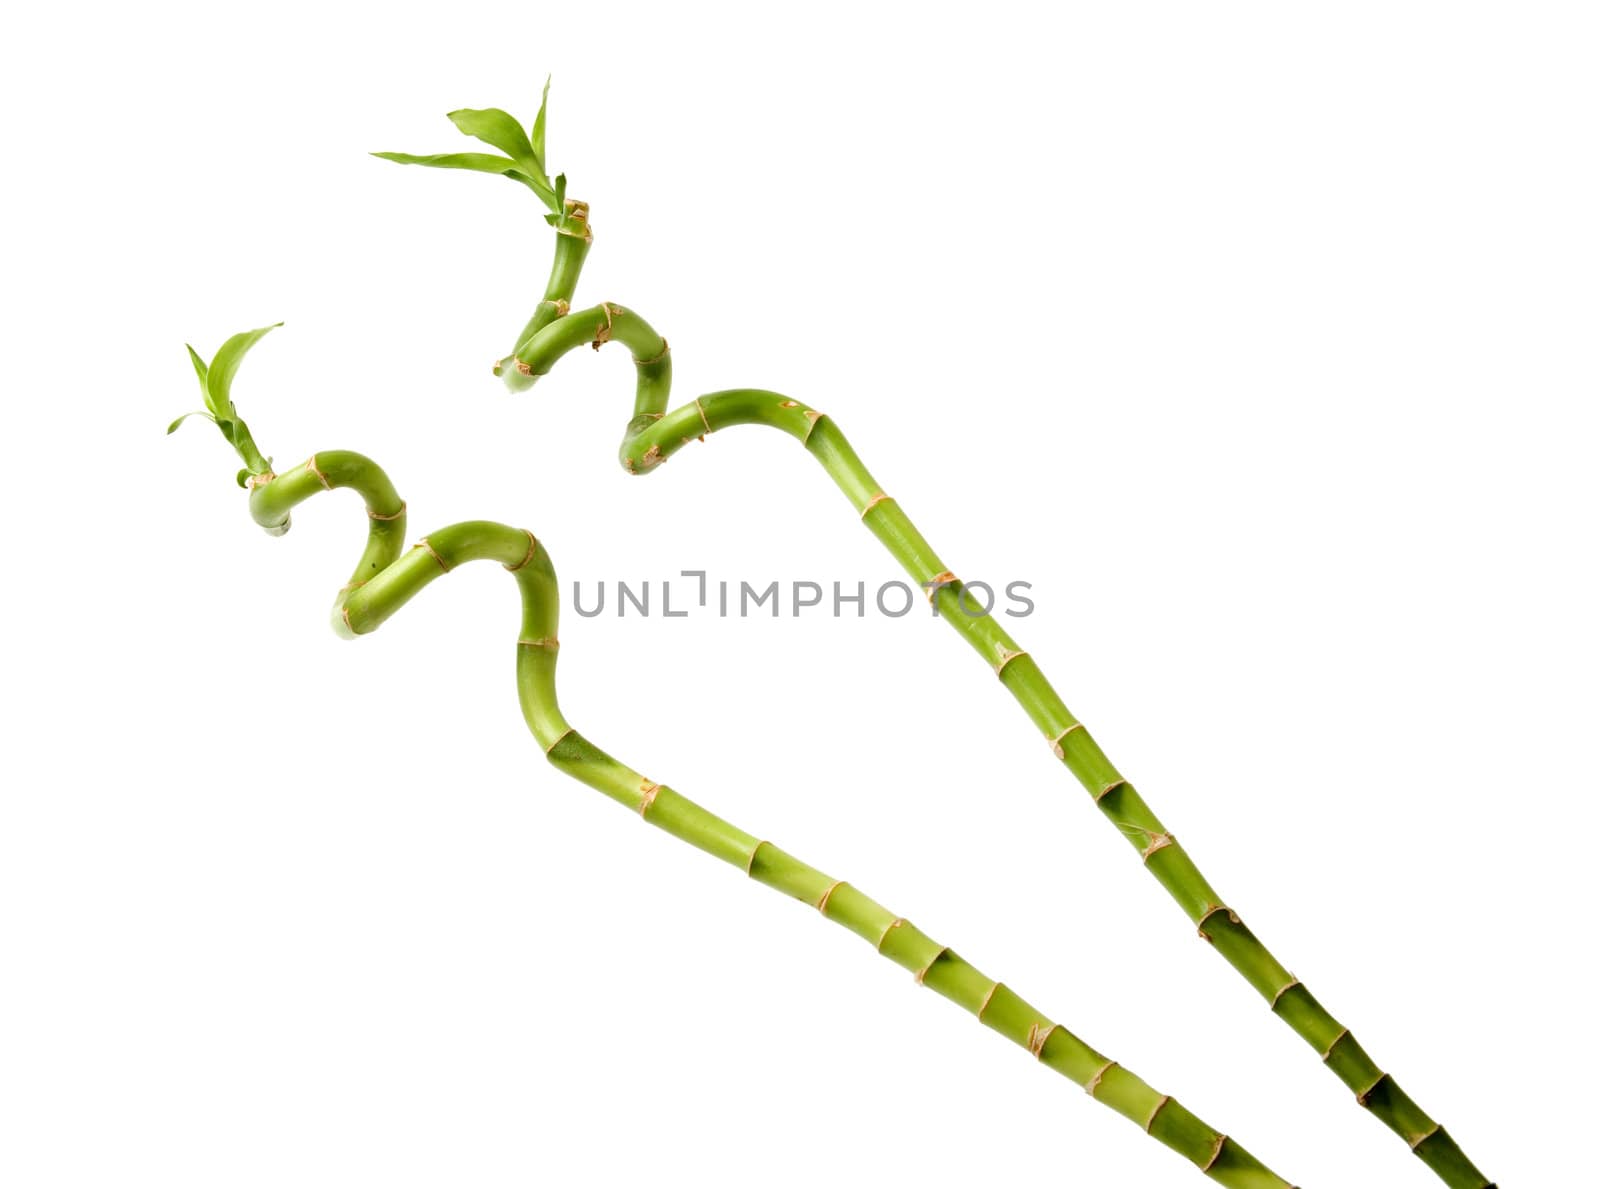 Two bamboo stems with leaves isolated against white.